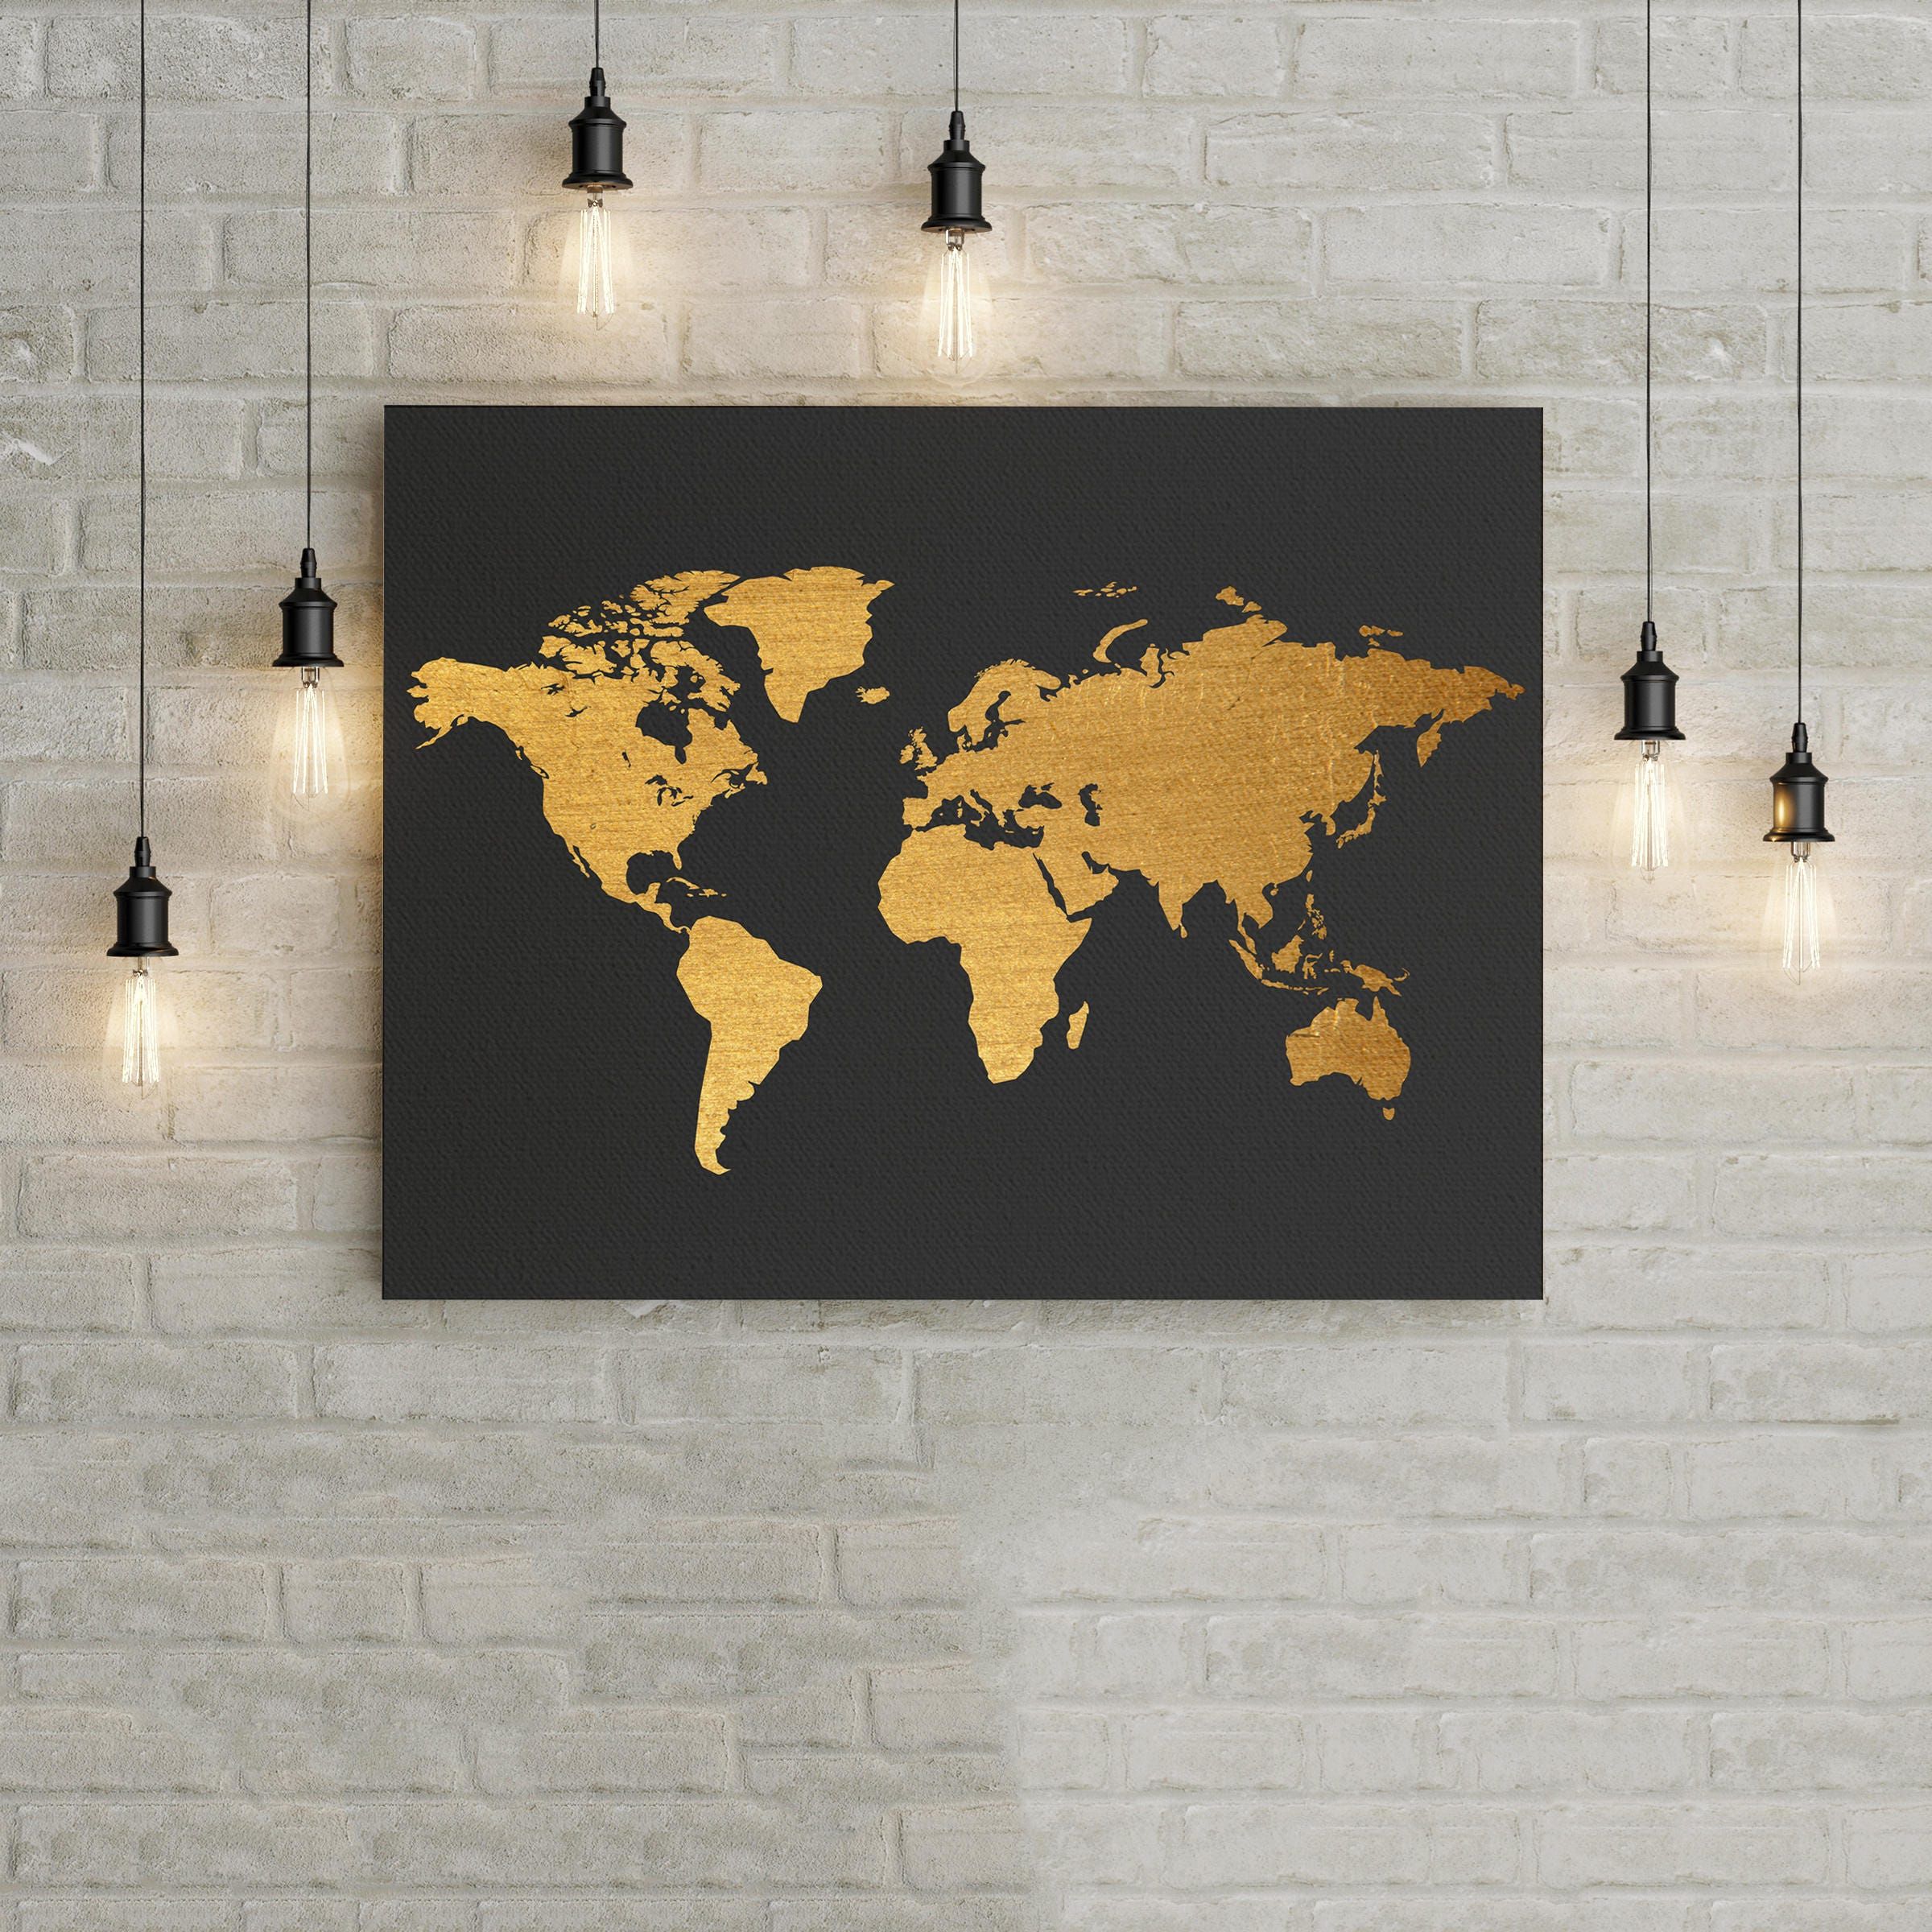 World Map Black And Gold Home Decor Wall Art Poster Office Inside Recent Globe Wall Art (View 14 of 20)